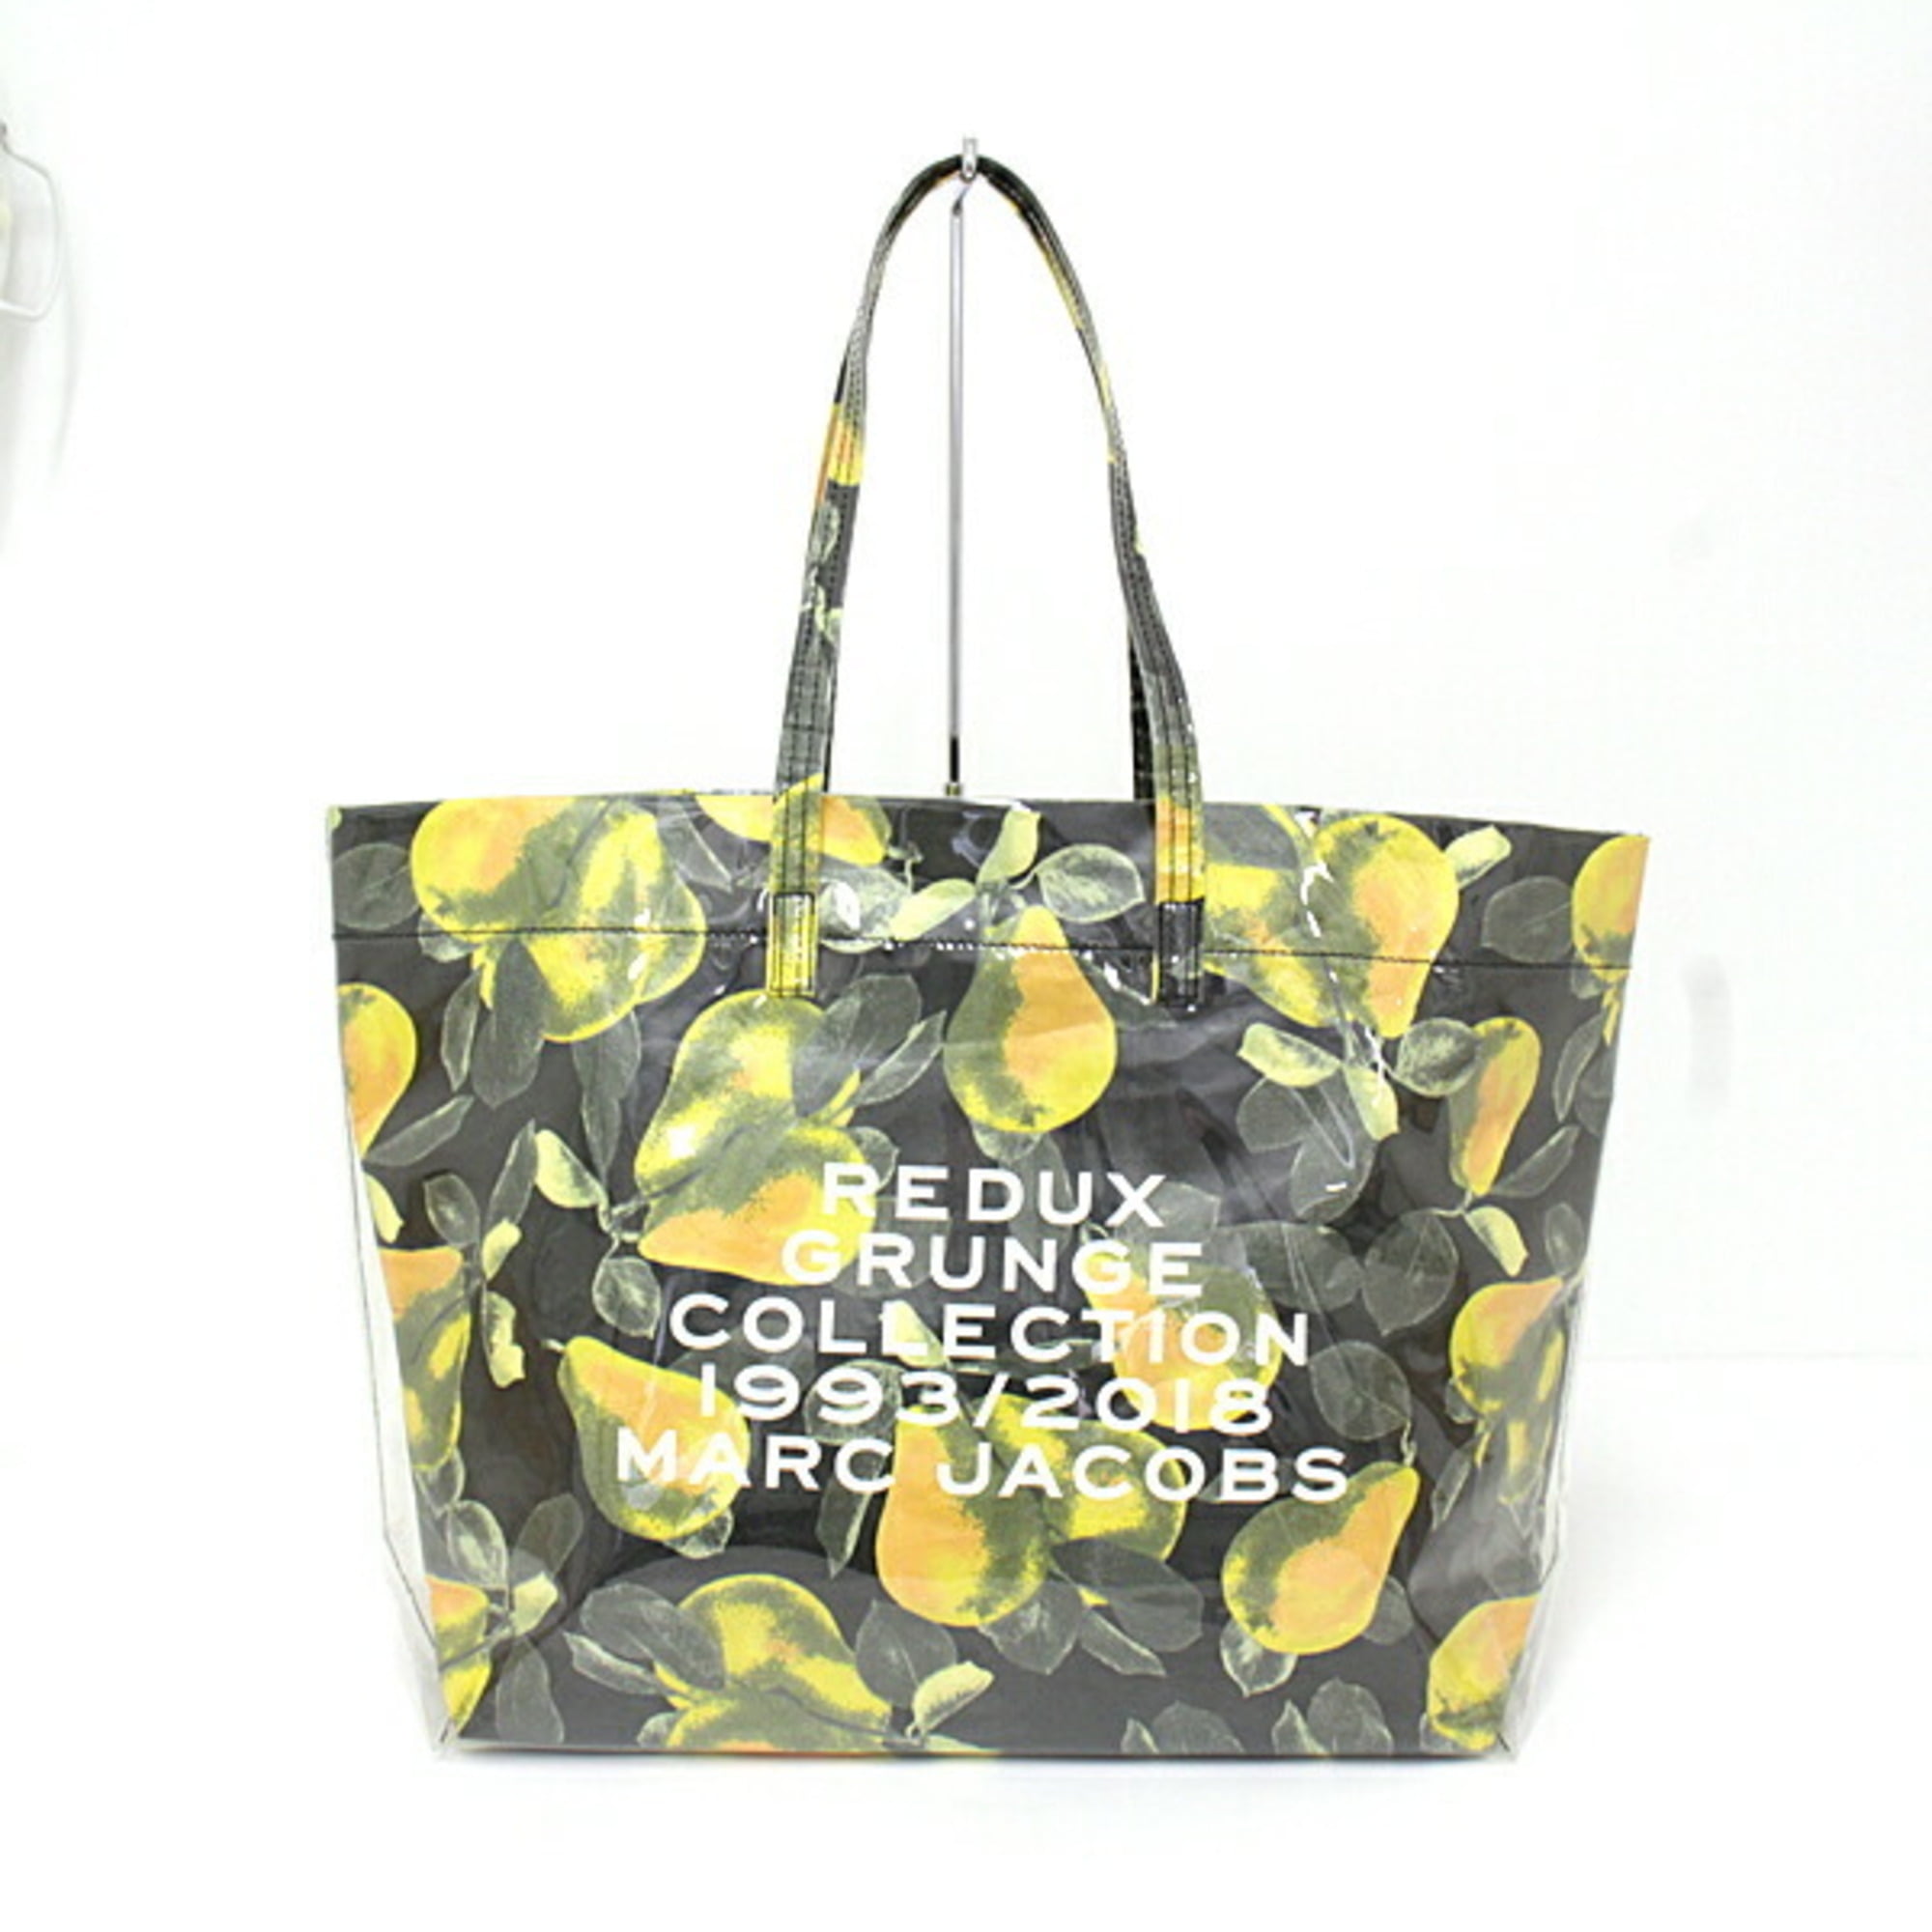 Authenticated used Marc Jacobs Marc Jacobs Redux Grunge Collection 1993/2018 Tote Bag High Density Polyethylene / Craft Paper Black Yellow Multicolor